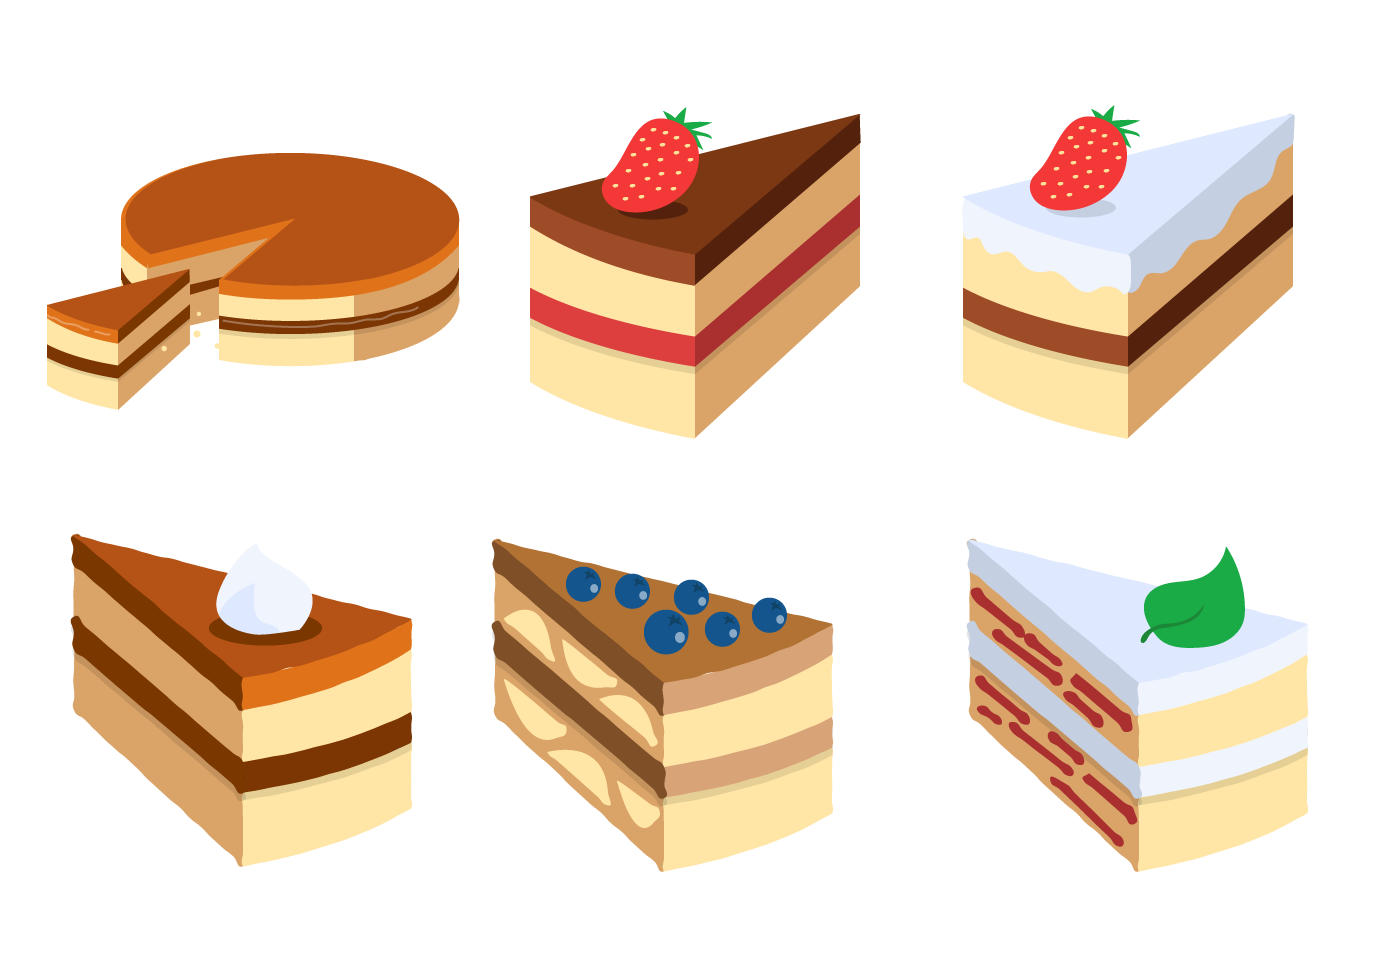 Download Slice. Cake Slice Vector Set Download Free Hdpng.com  - Cakes And Pies, Transparent background PNG HD thumbnail